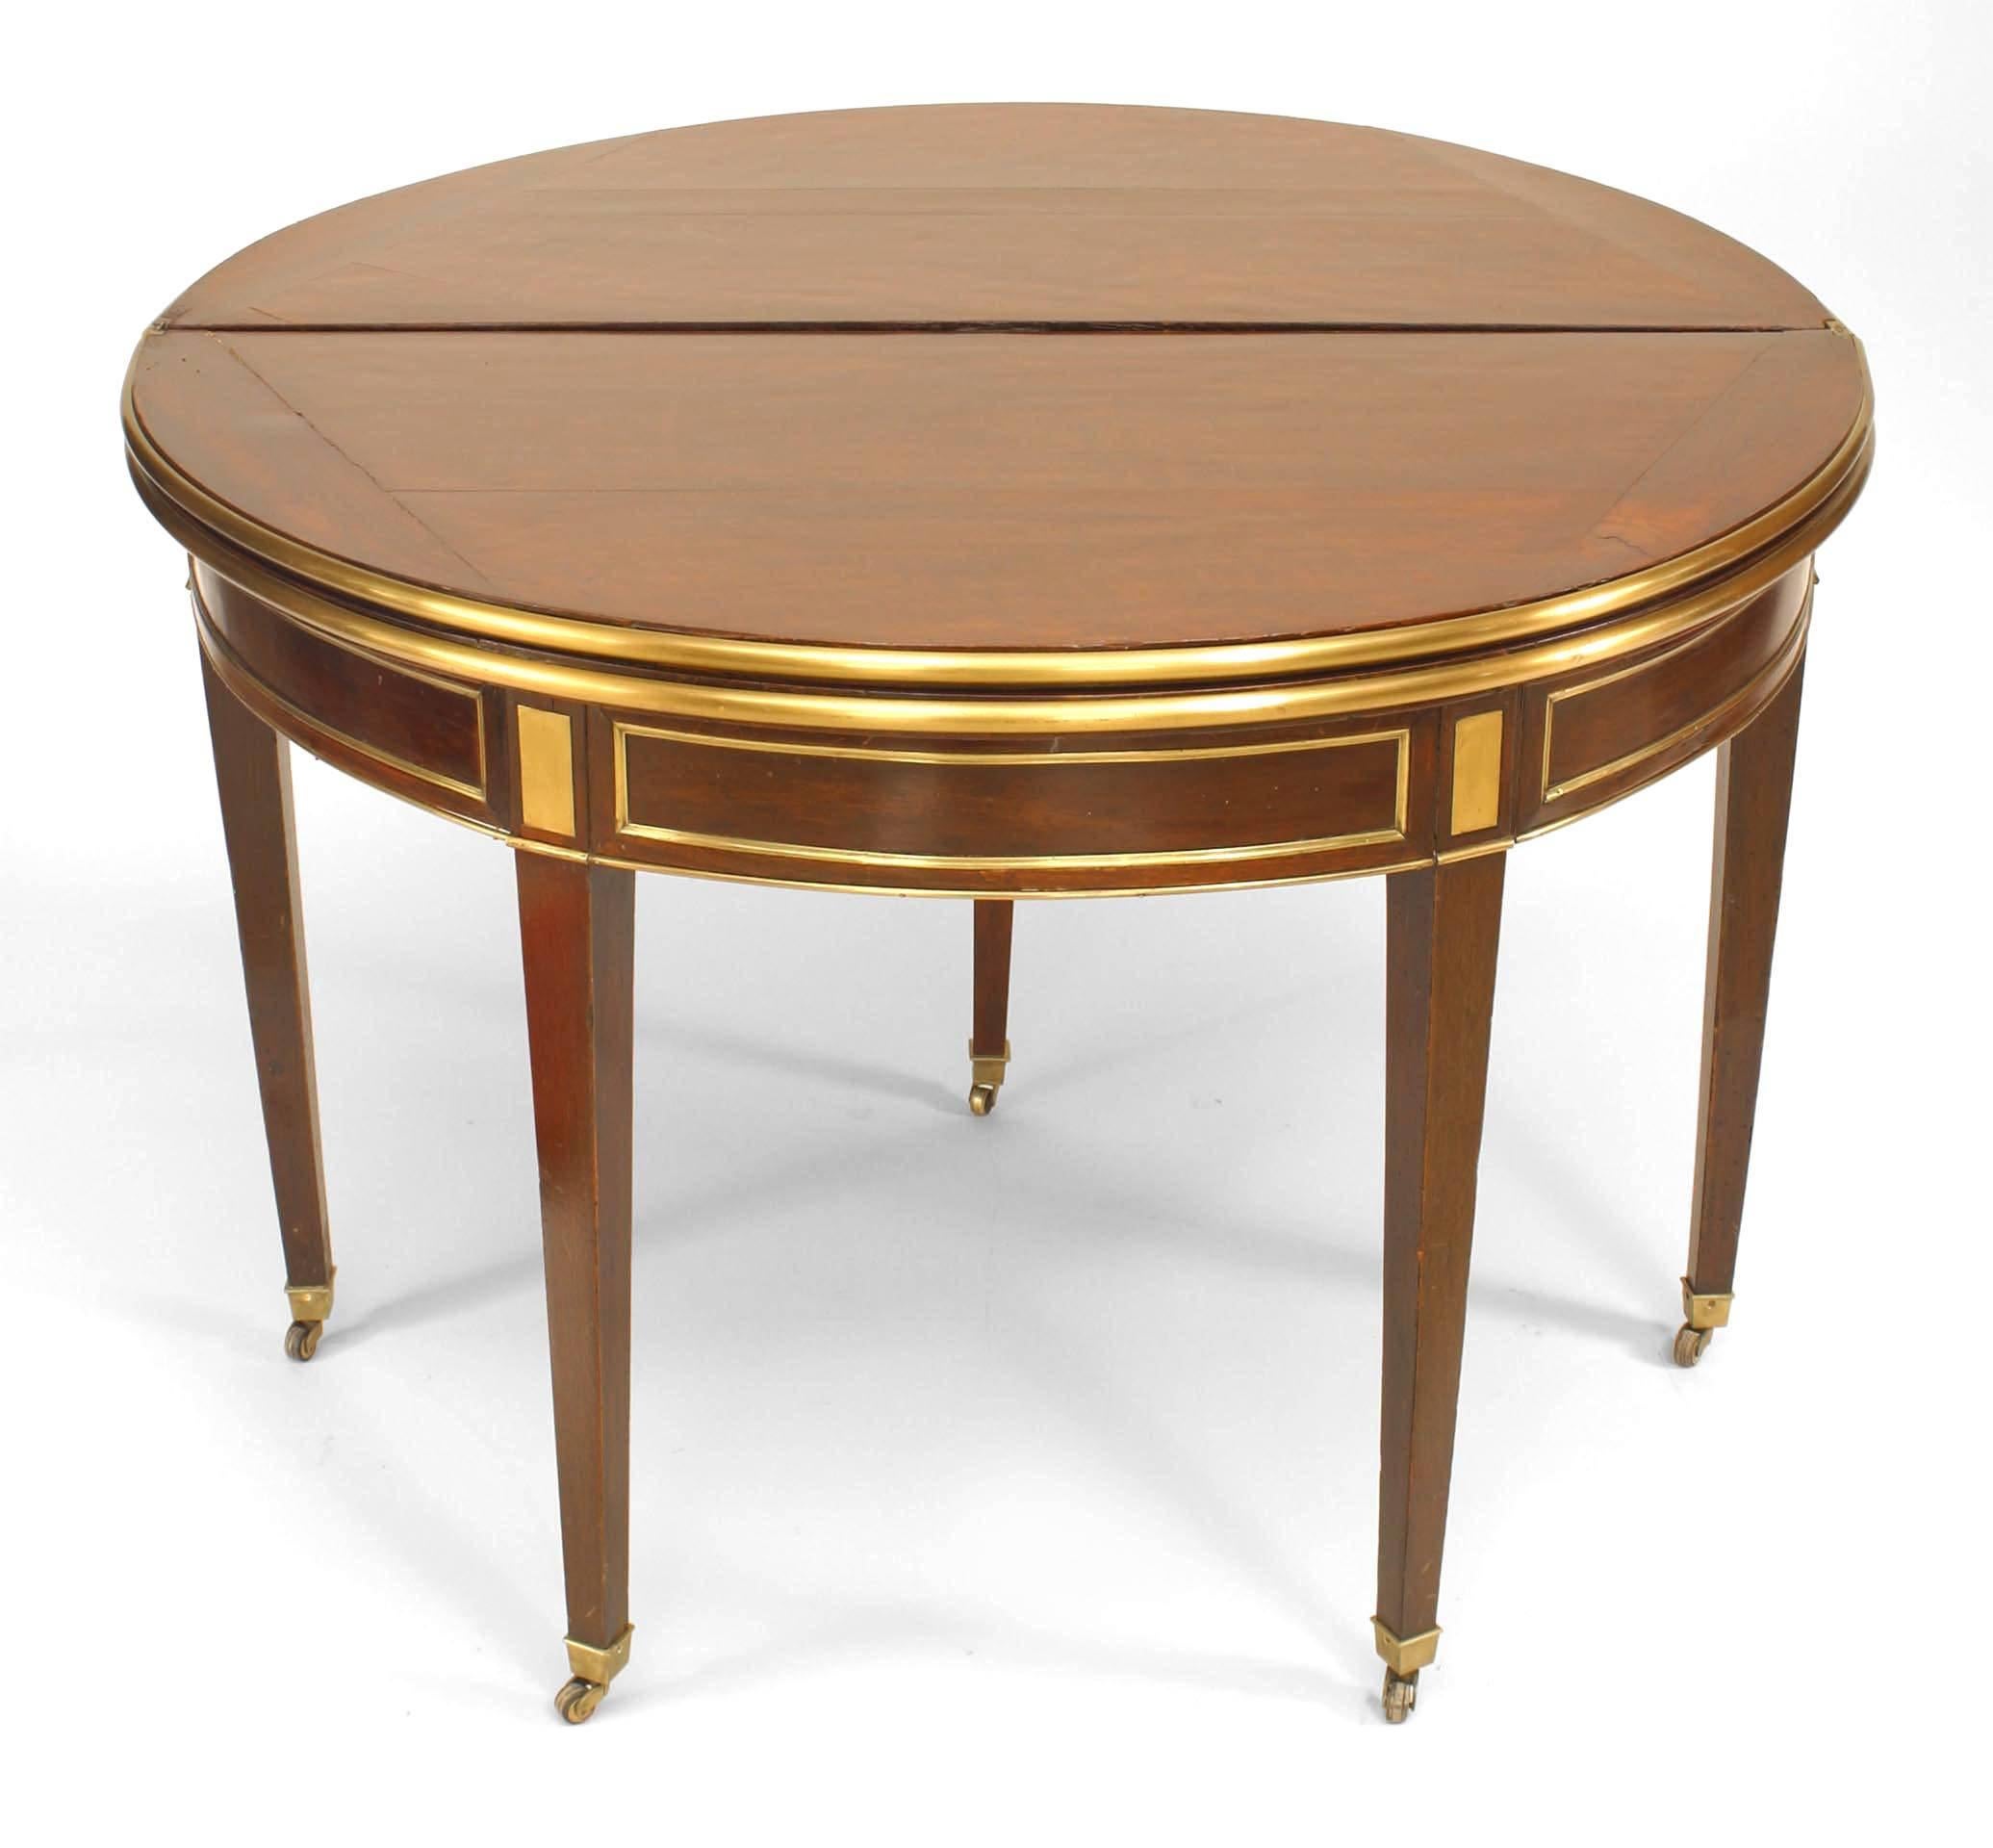 French Louis XVI-style (19th Century) demilune shaped double flip top console/game table with brass trim
